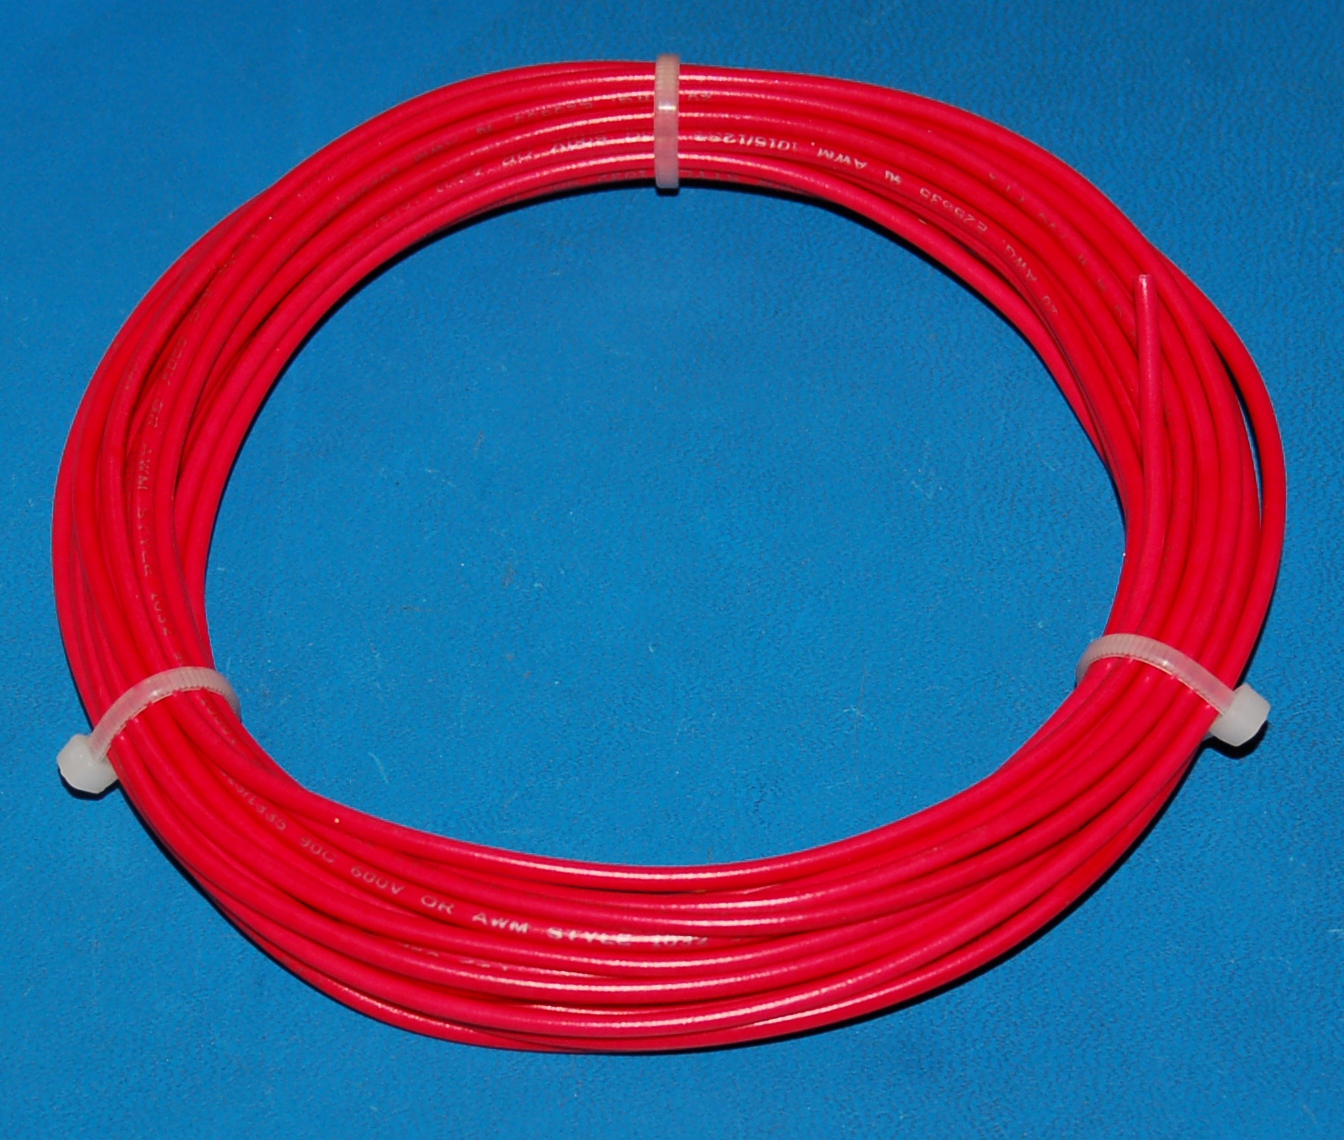 Solid Tinned Copper Wire, 600V, #20 AWG x 25' (Red) - Cliquez sur l'image pour fermer